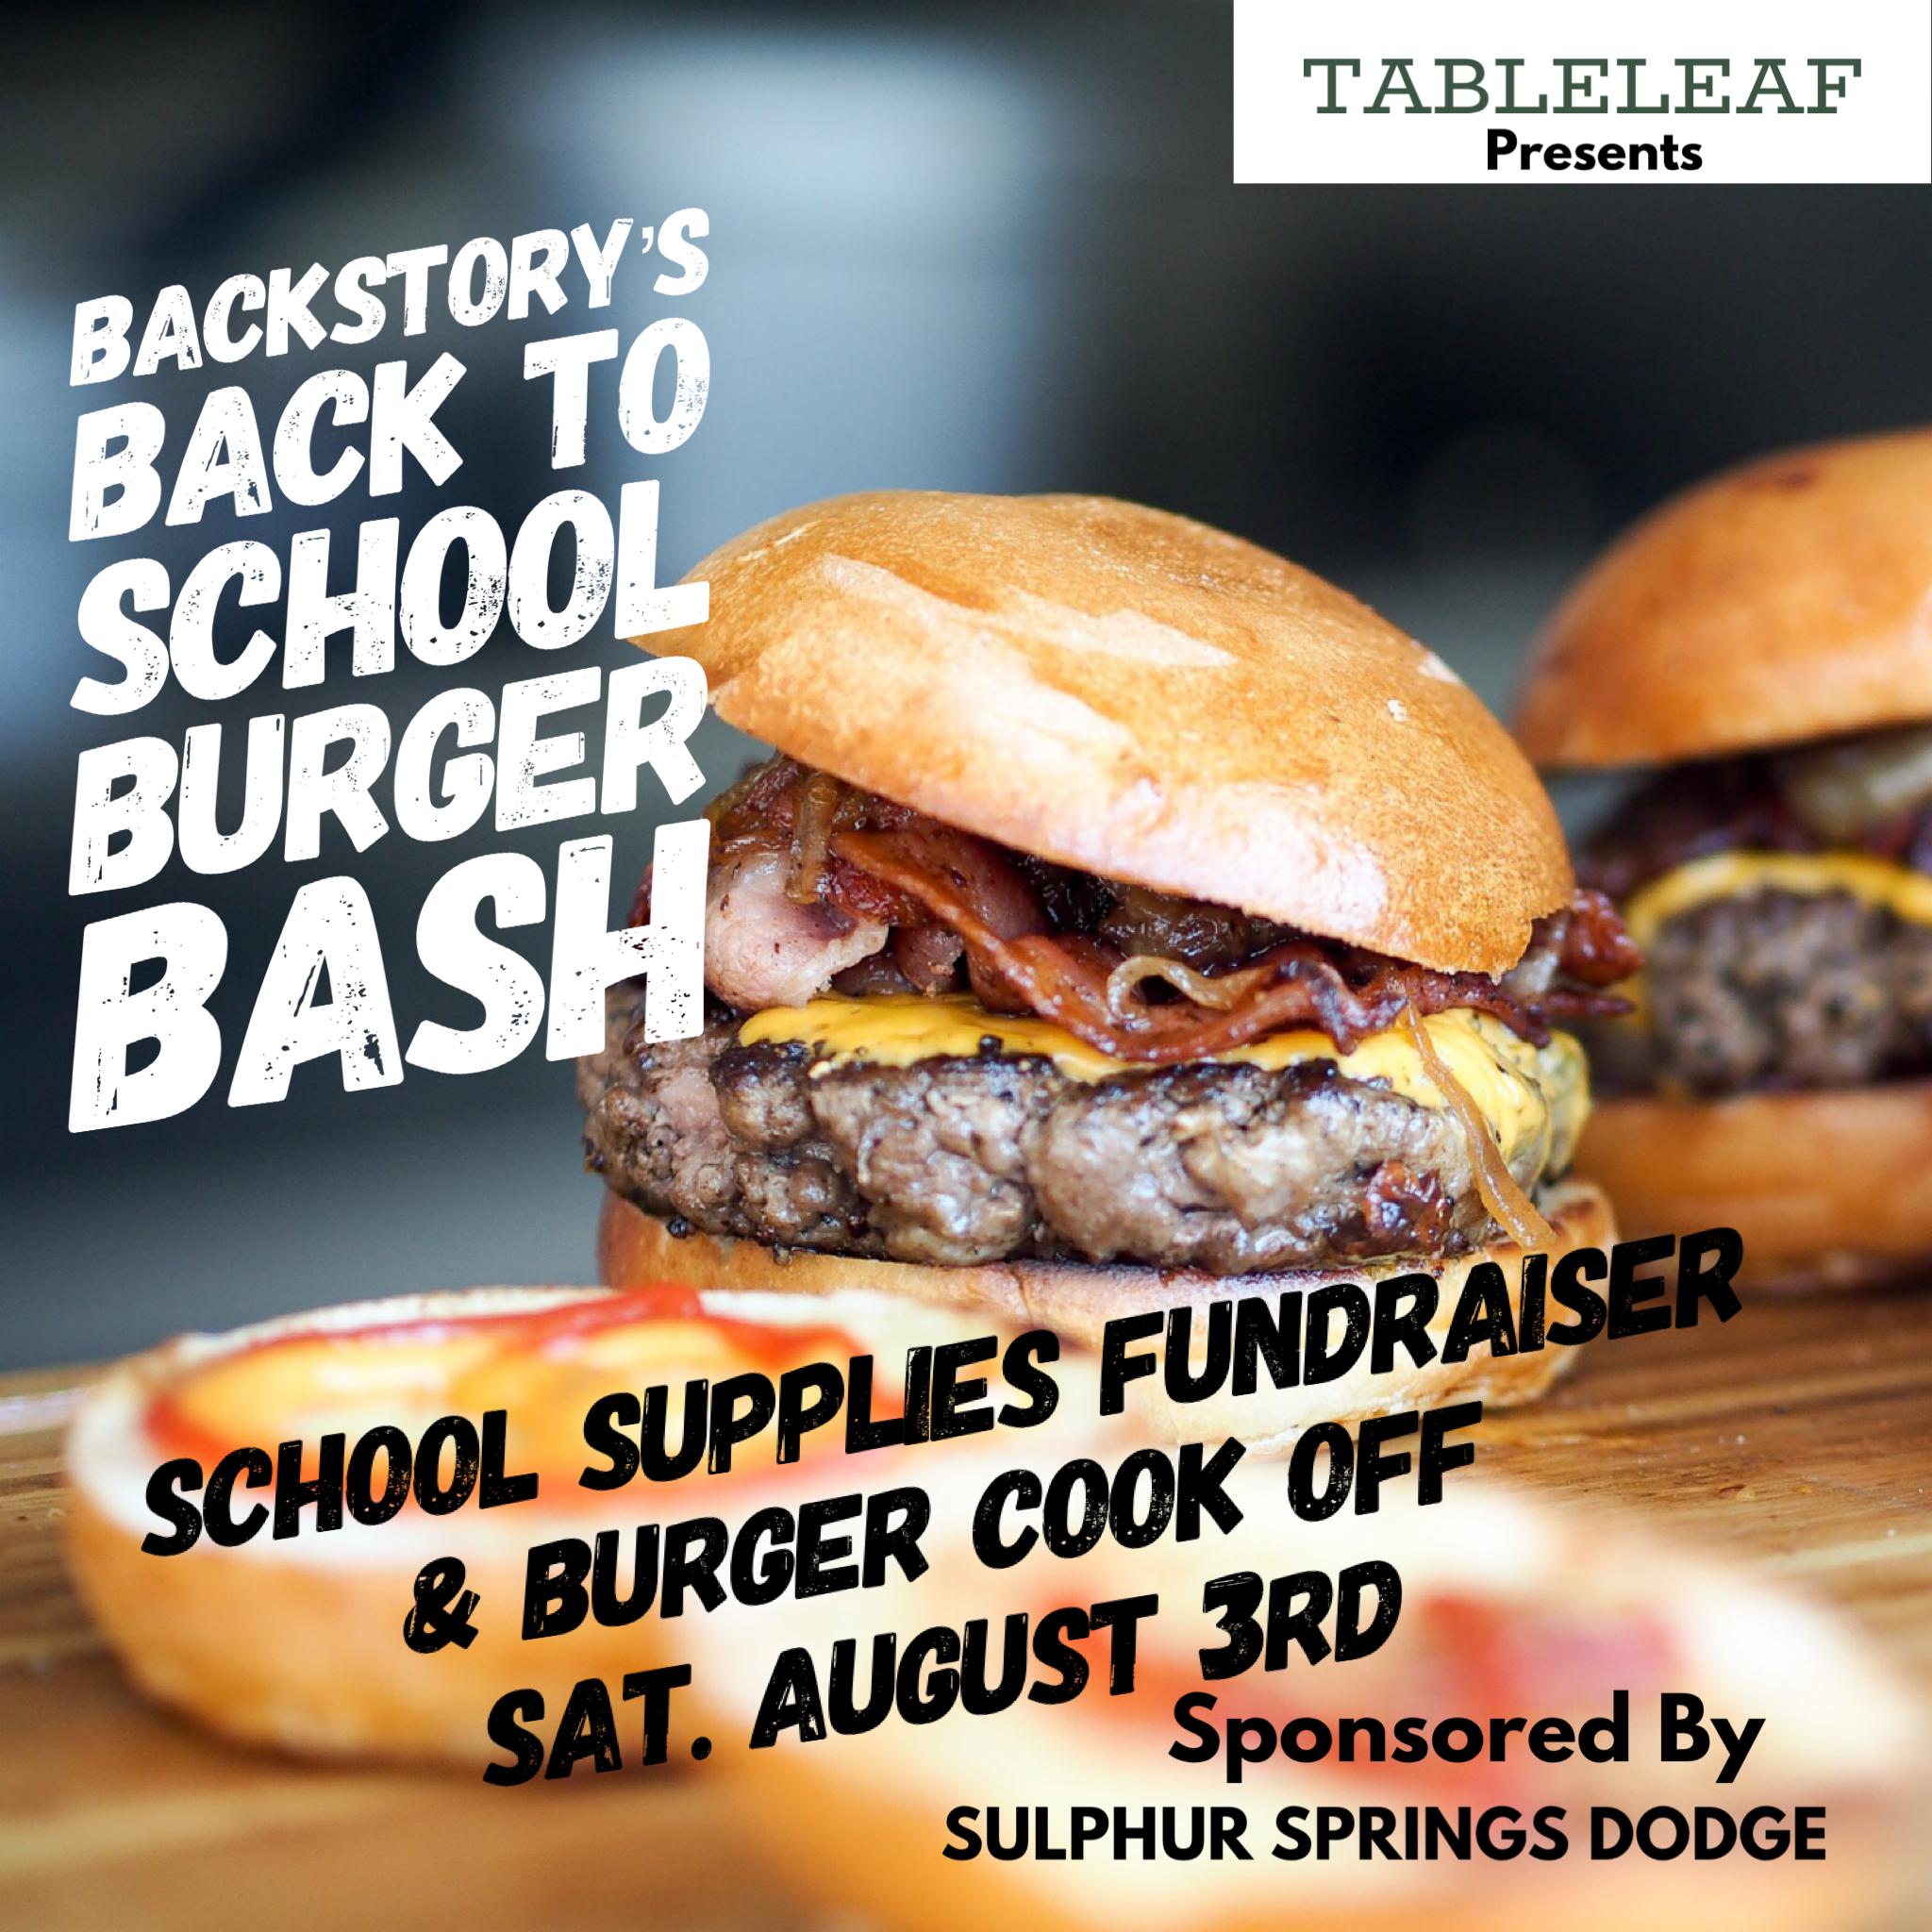 Tableleaf and Sulphur Springs Dodge Hosting Back to School Burger Bash at Backstory Brewery on August 3rd. 15 Teams Can Compete to Win $500 in Burger Cook-Off.